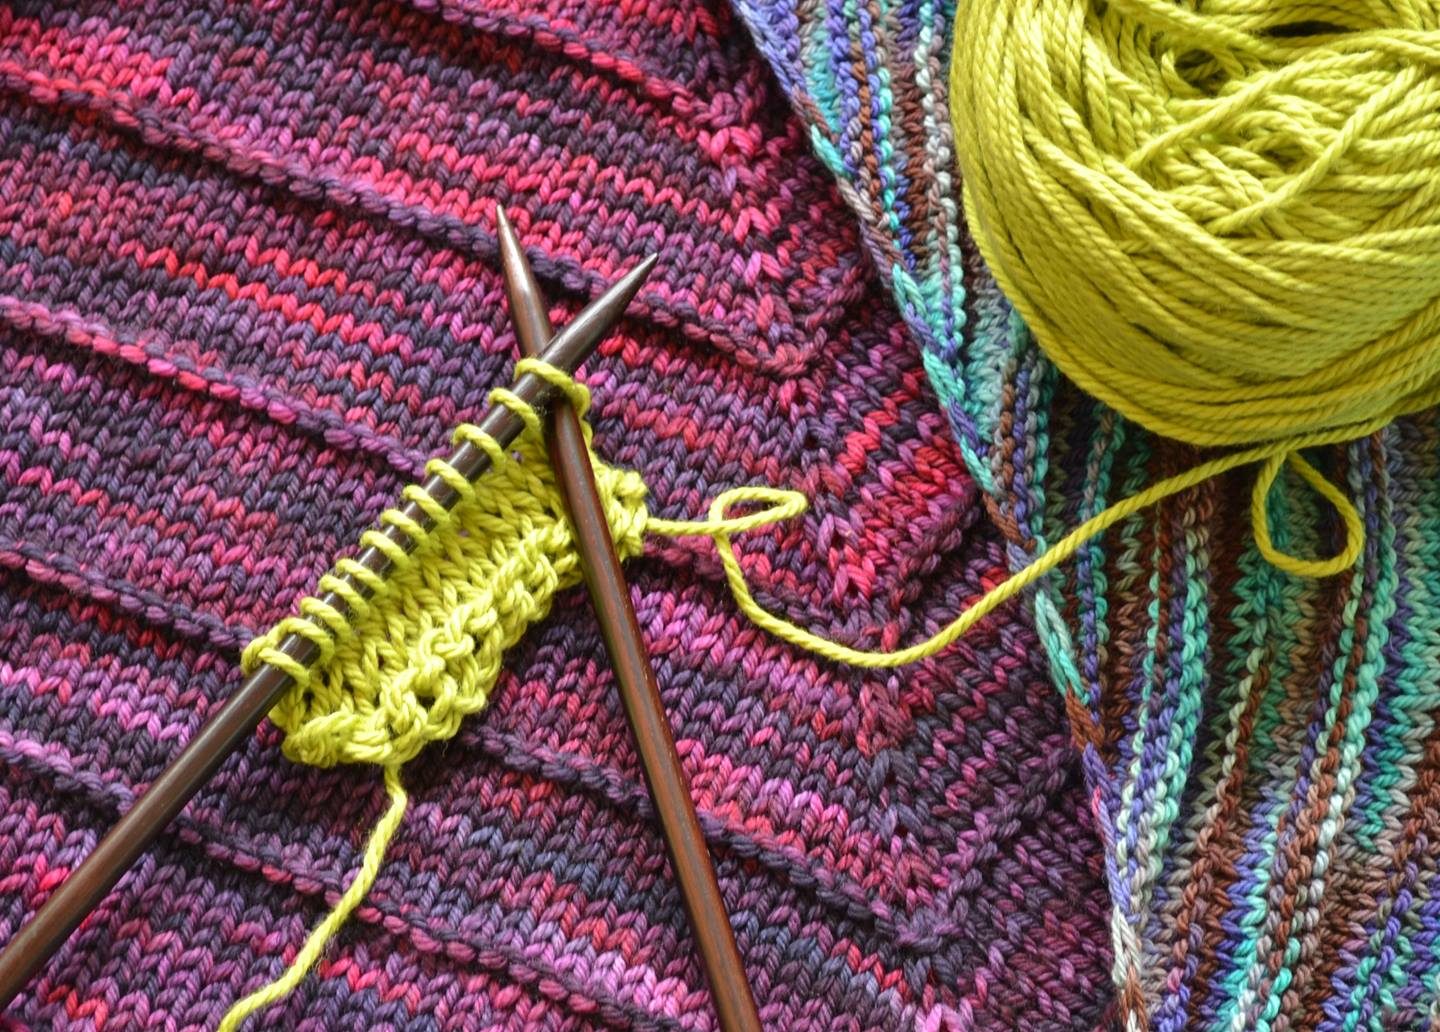 Knitting vs. Crochet: What’s the Difference?